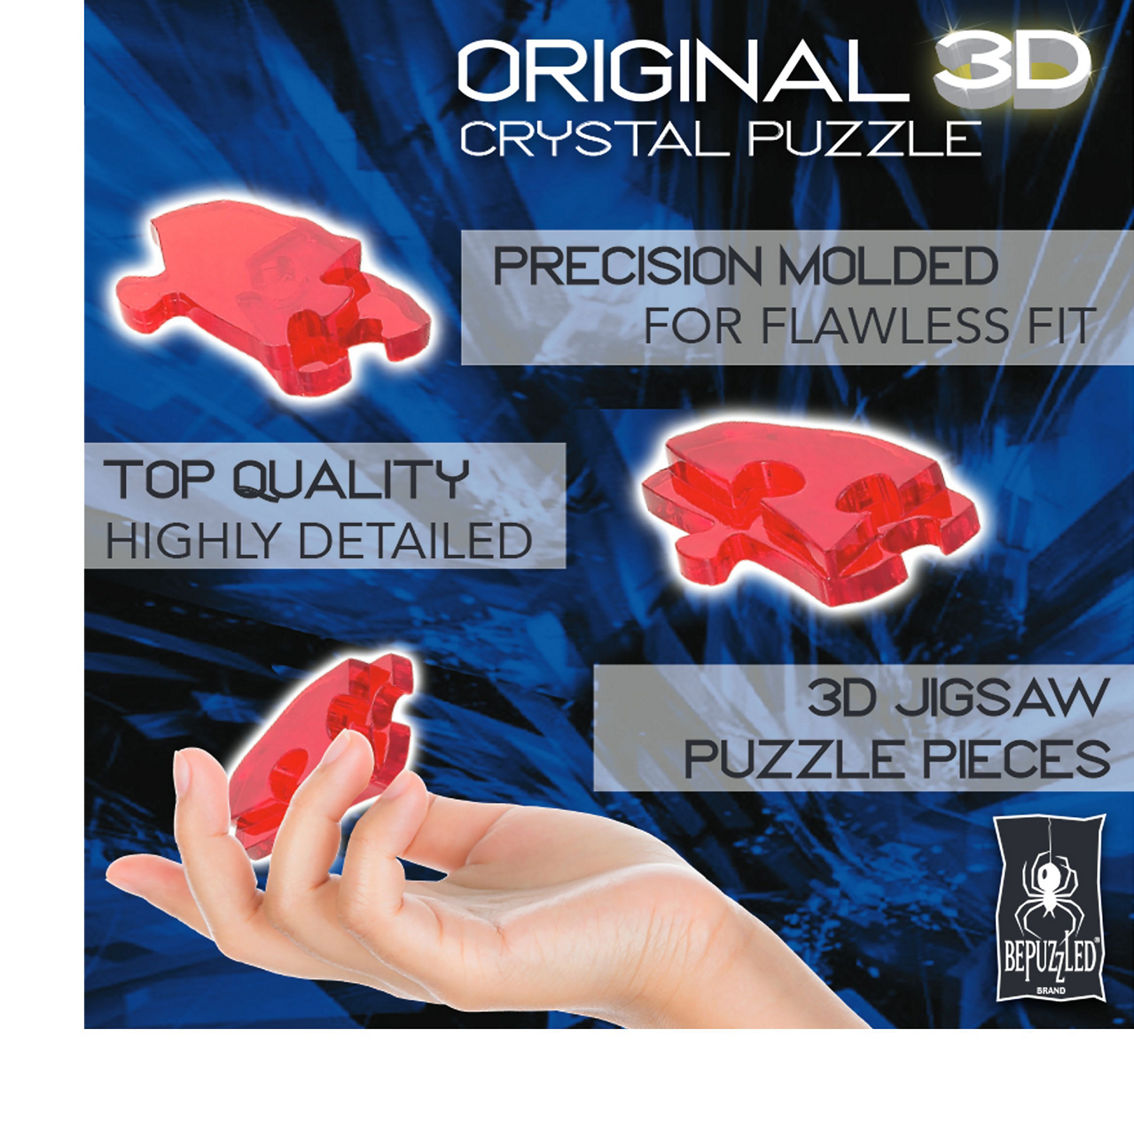 BePuzzled 3D Crystal Puzzle - Turtles (Blue): 37 Pcs - Image 5 of 5